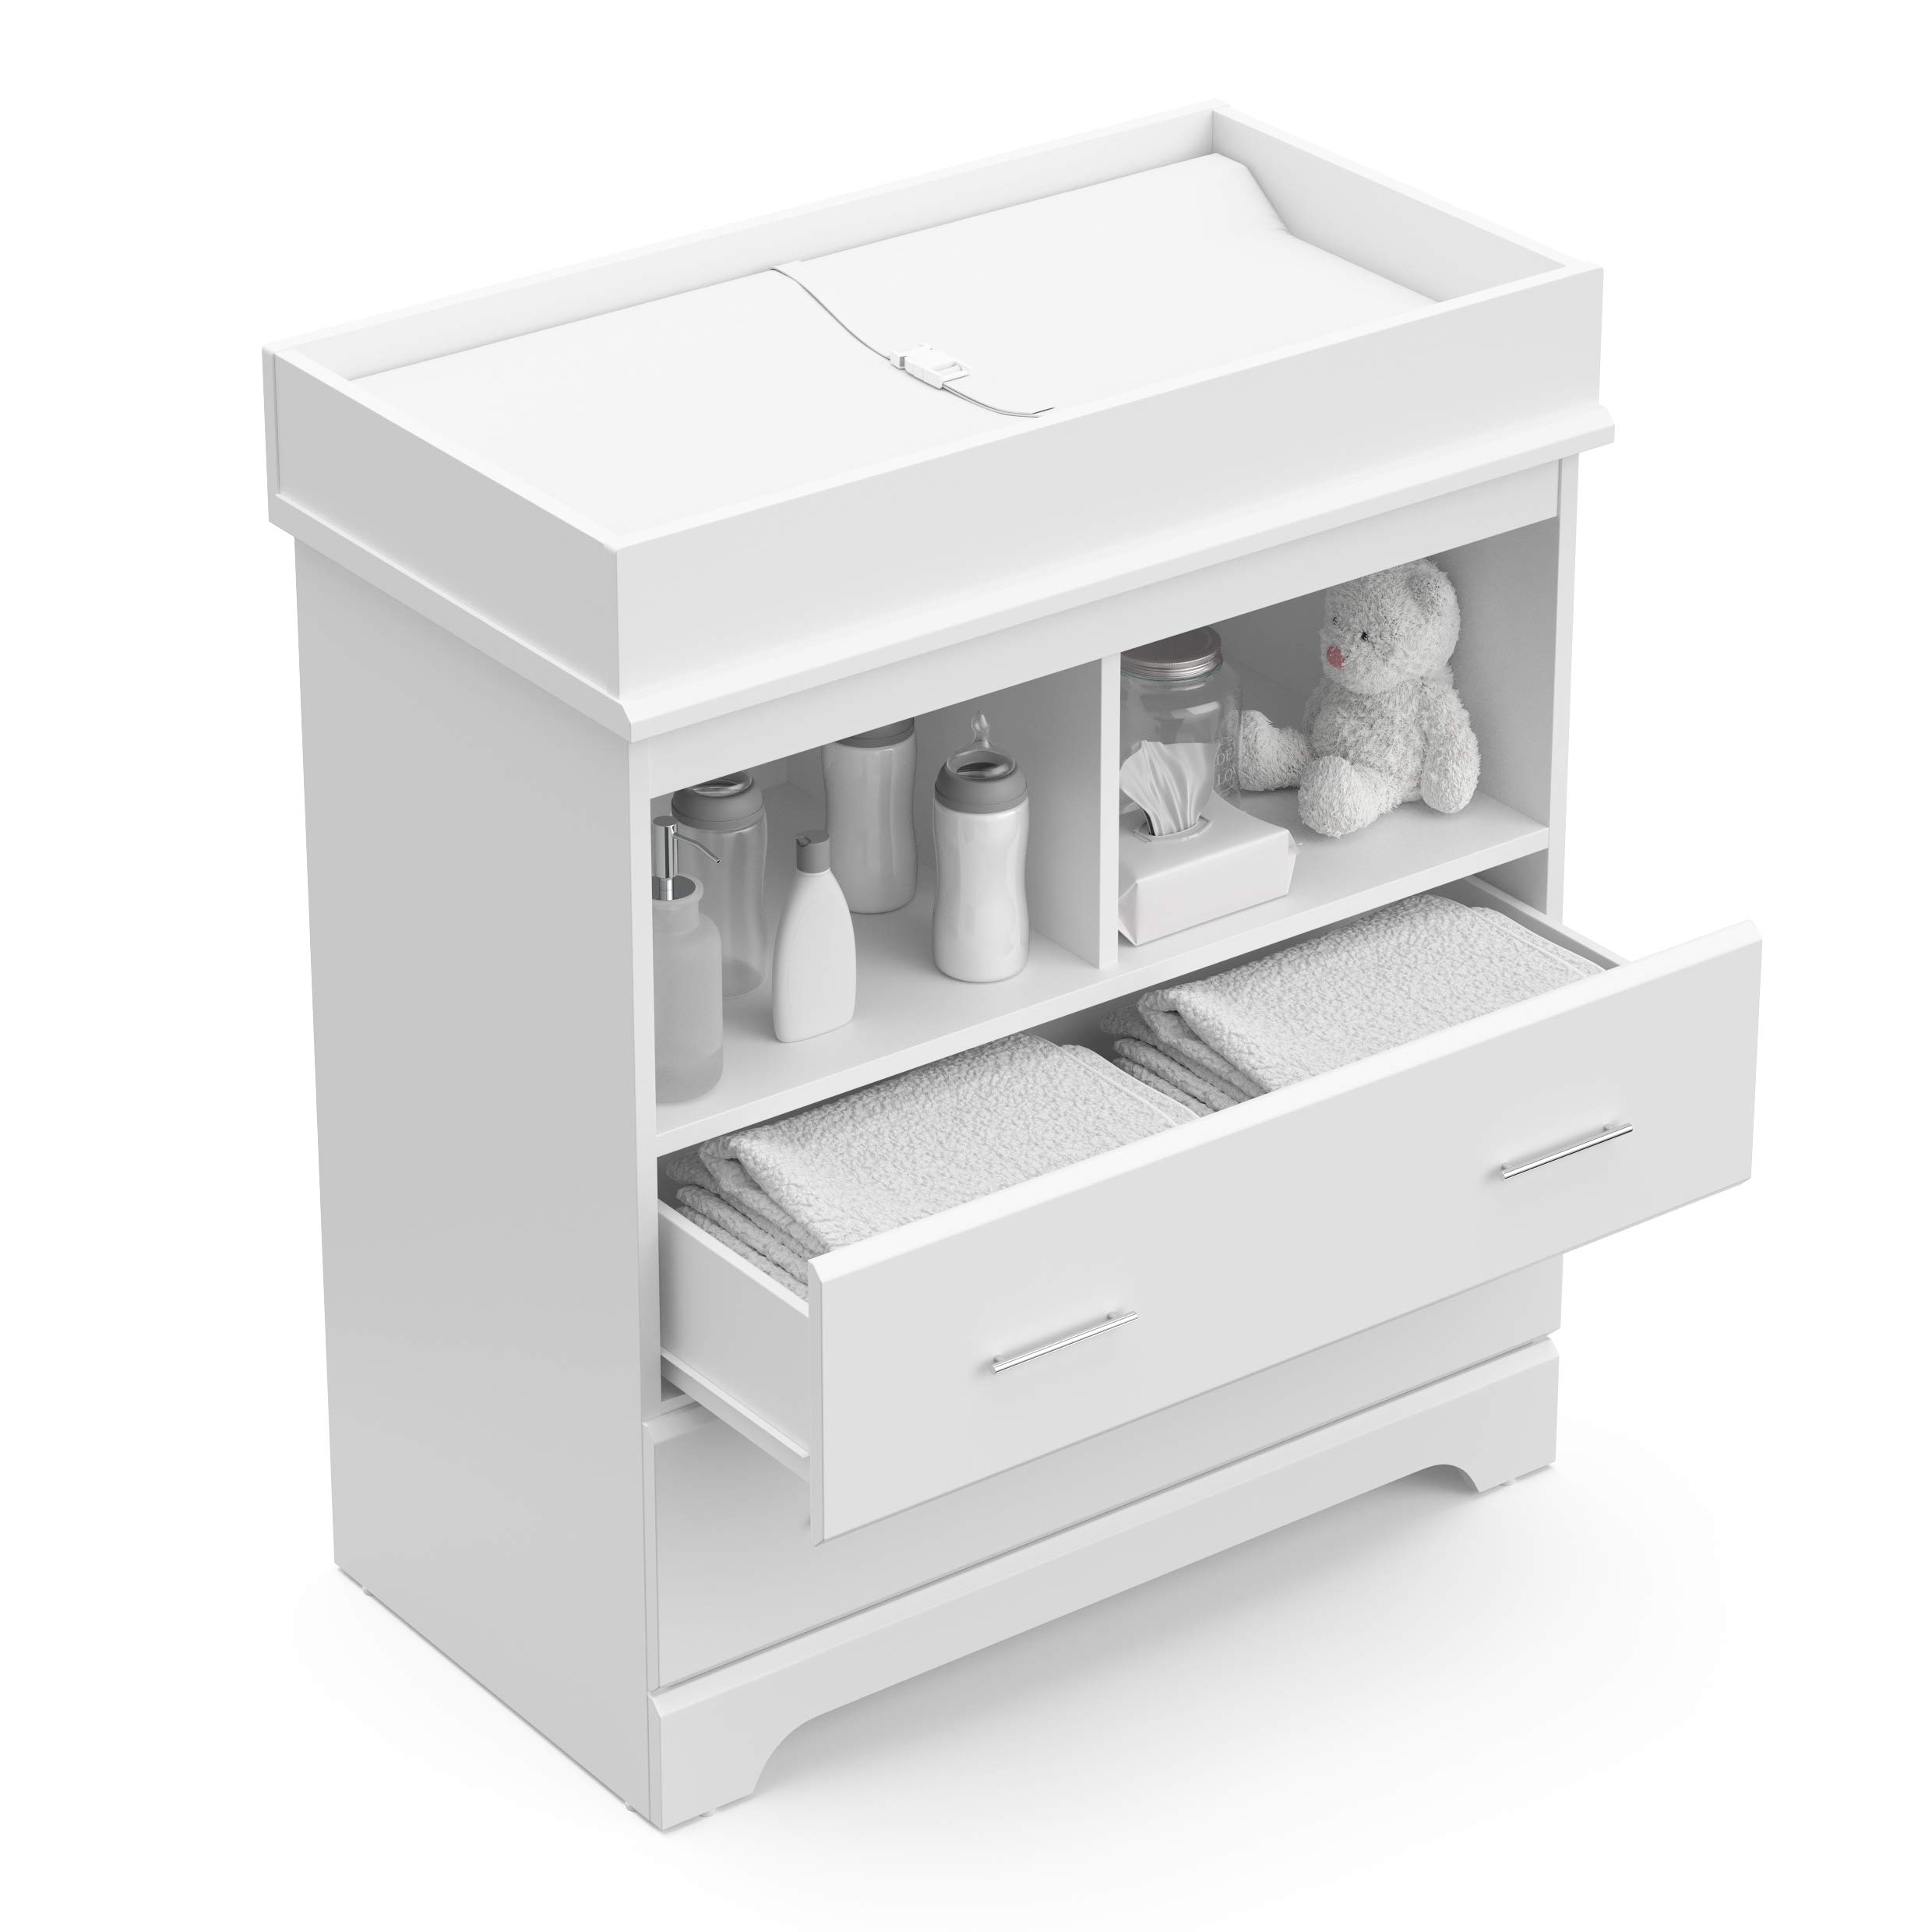 Storkcraft Brookside 2 Drawer Changing Table Dresser (White) – Nursery Dresser Organizer with Changing Table Topper, Chest of Drawers for Bedroom with 2 Drawers, Universal Design